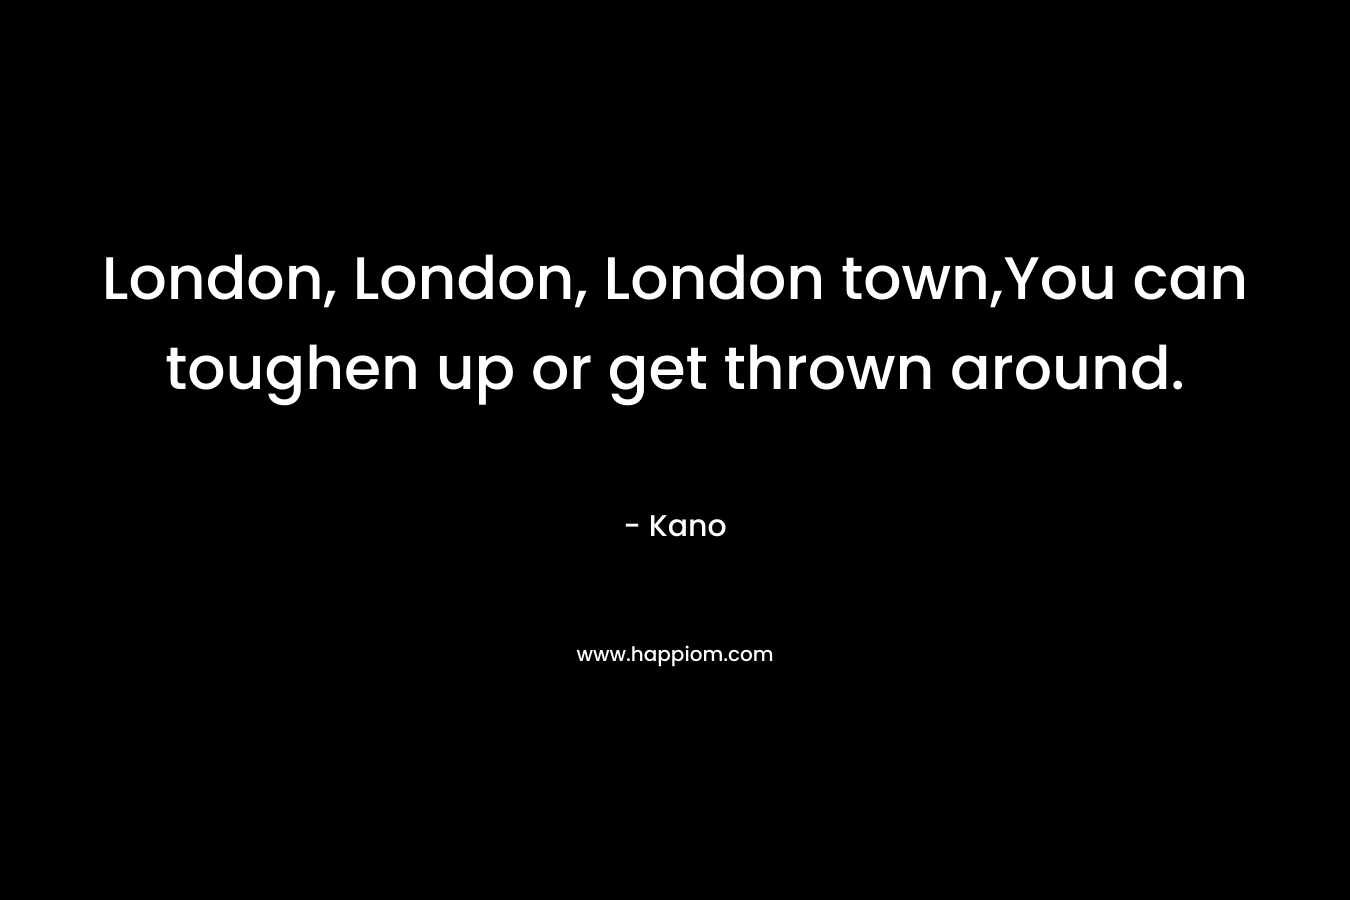 London, London, London town,You can toughen up or get thrown around. – Kano